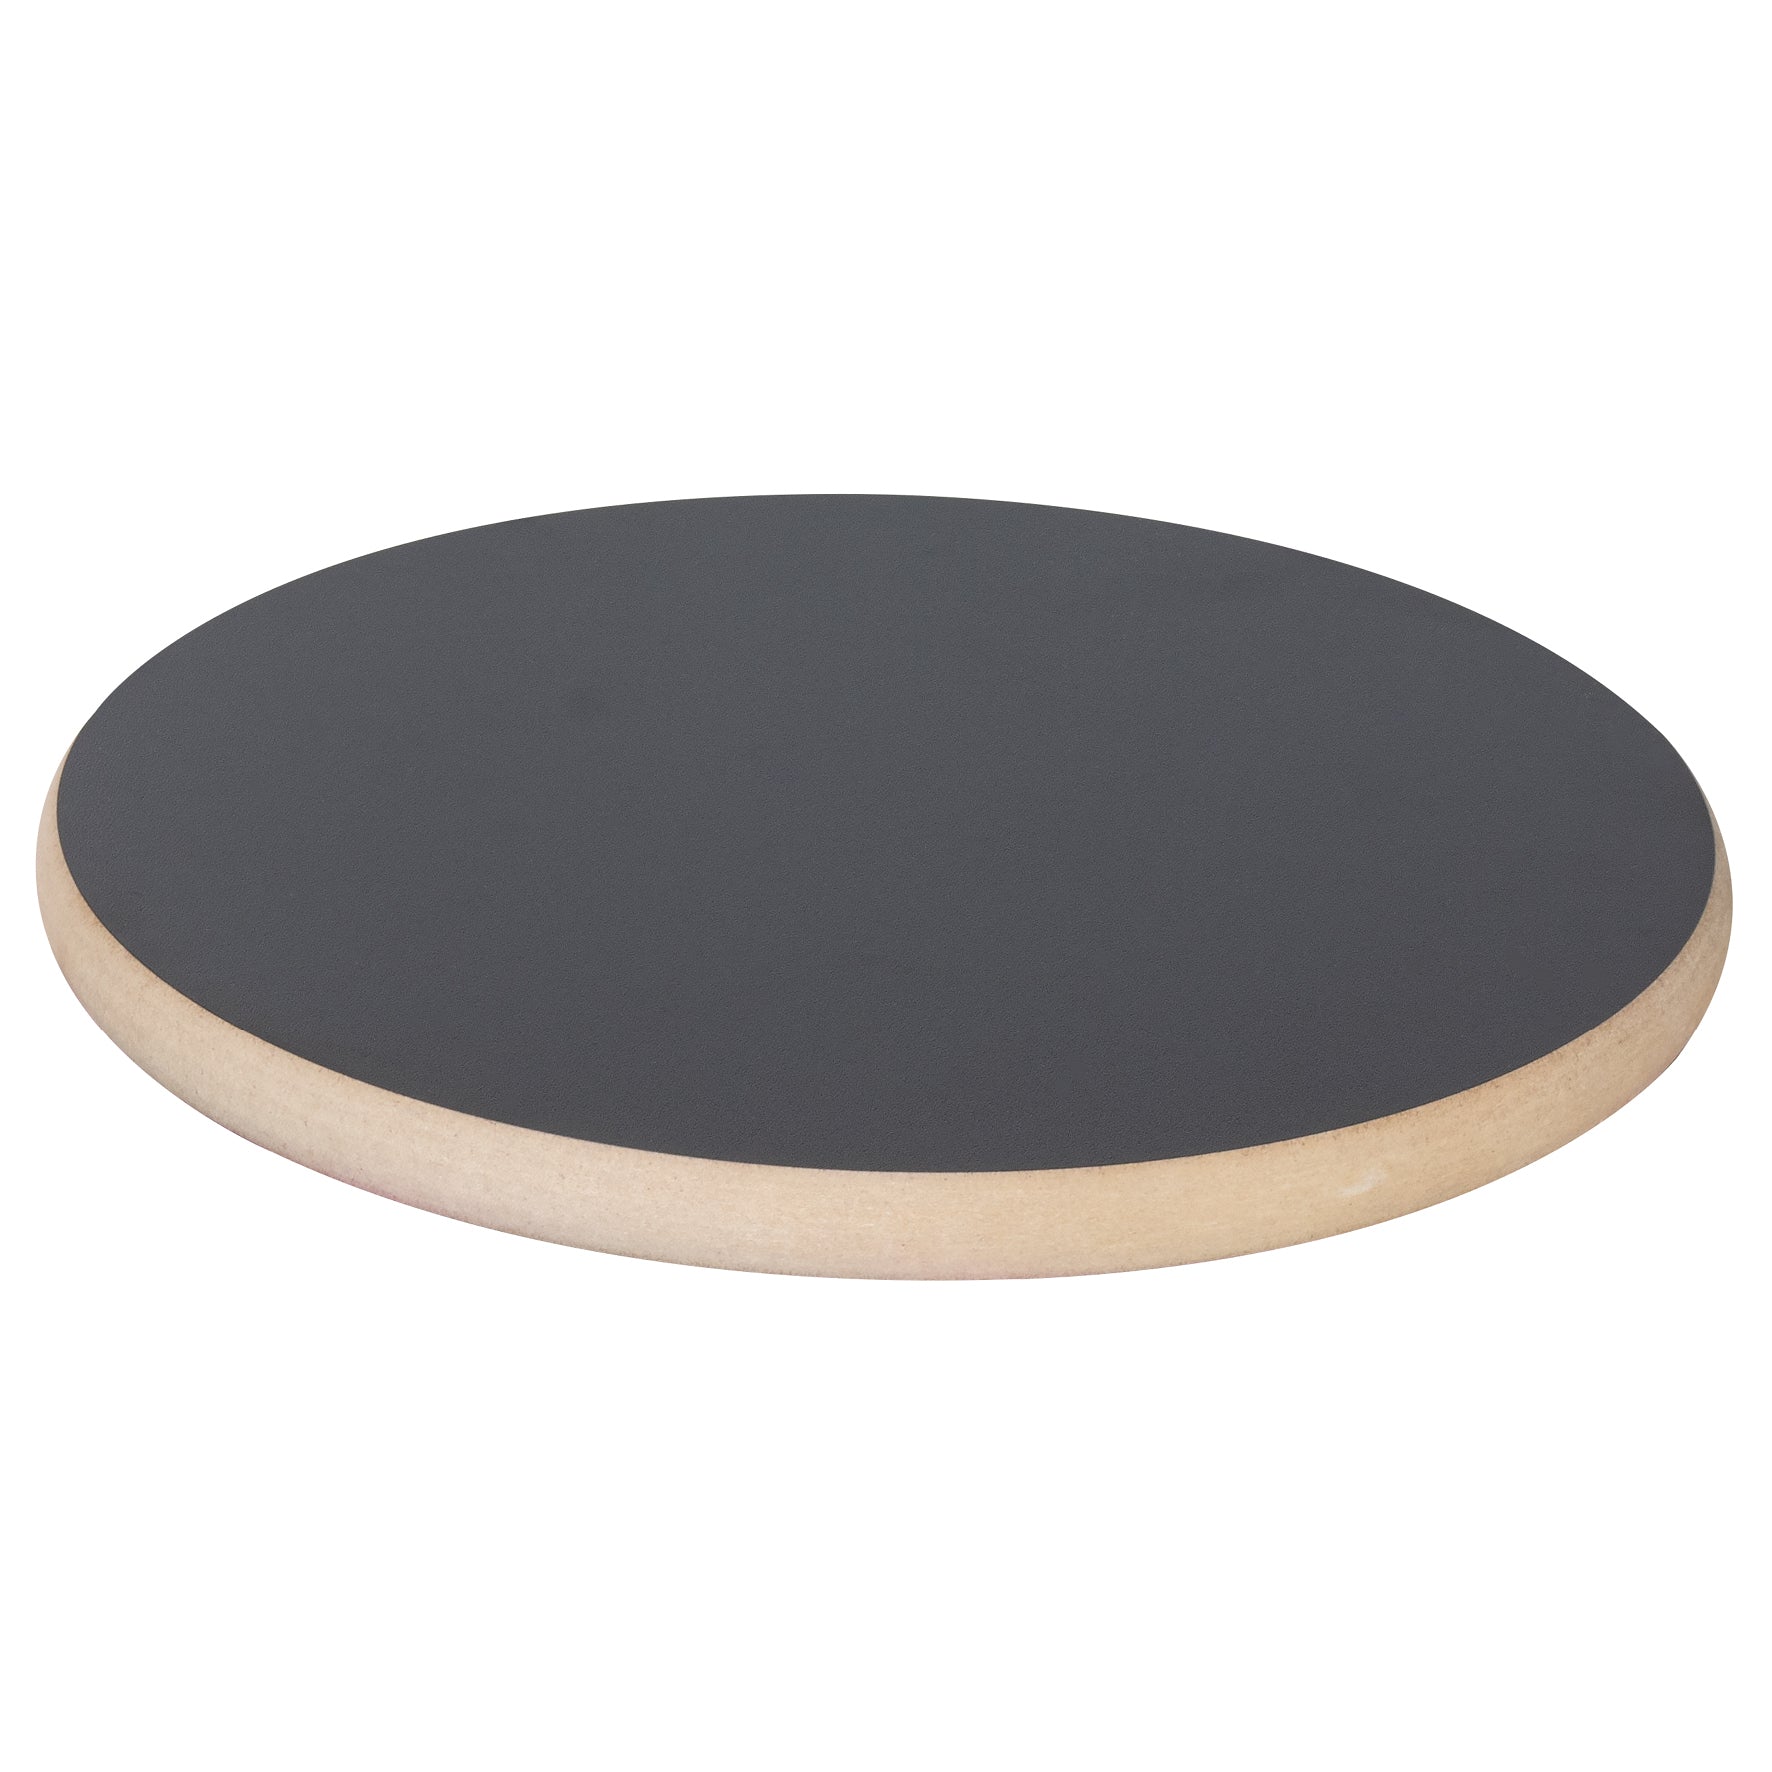 Black round rollo decor plant caddy. Made from MDF with a high-grade coating. 220 lbs. capacity. 11.4"D x 1.1"H, 2.4 lbs.